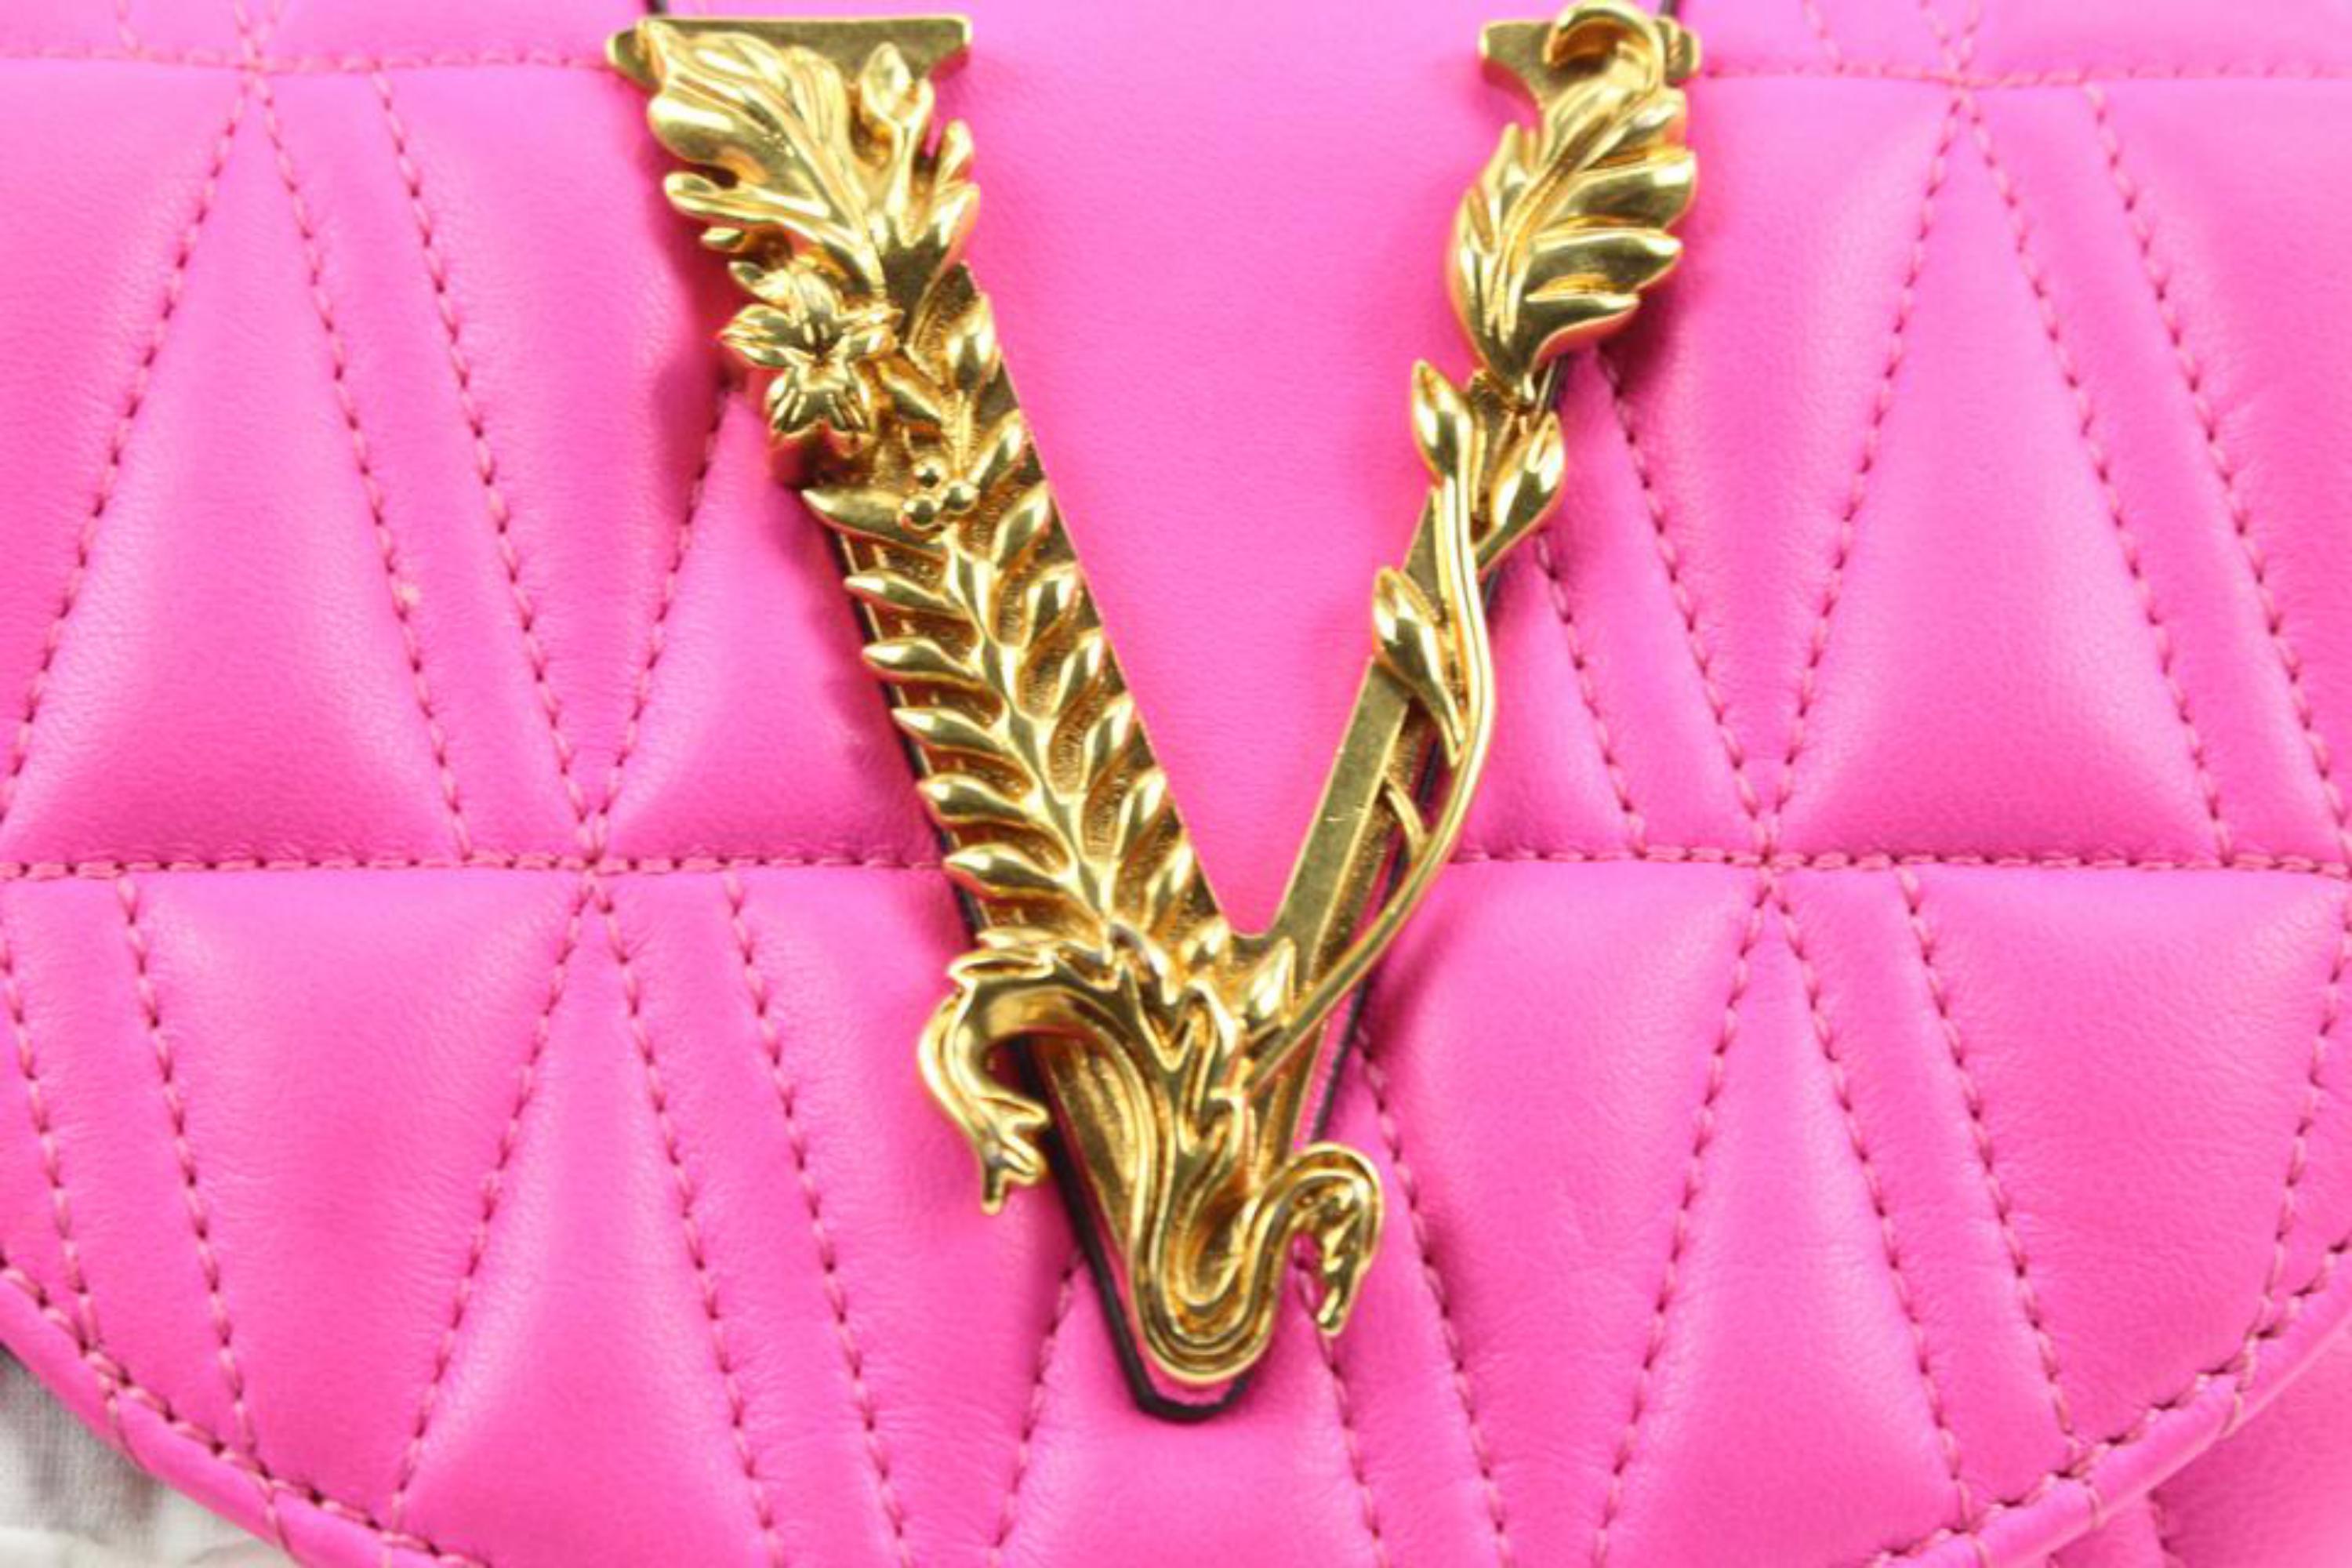 Versace Pink Quilted Leather Fuchsia Virtus Belt Bag s214ve71 1